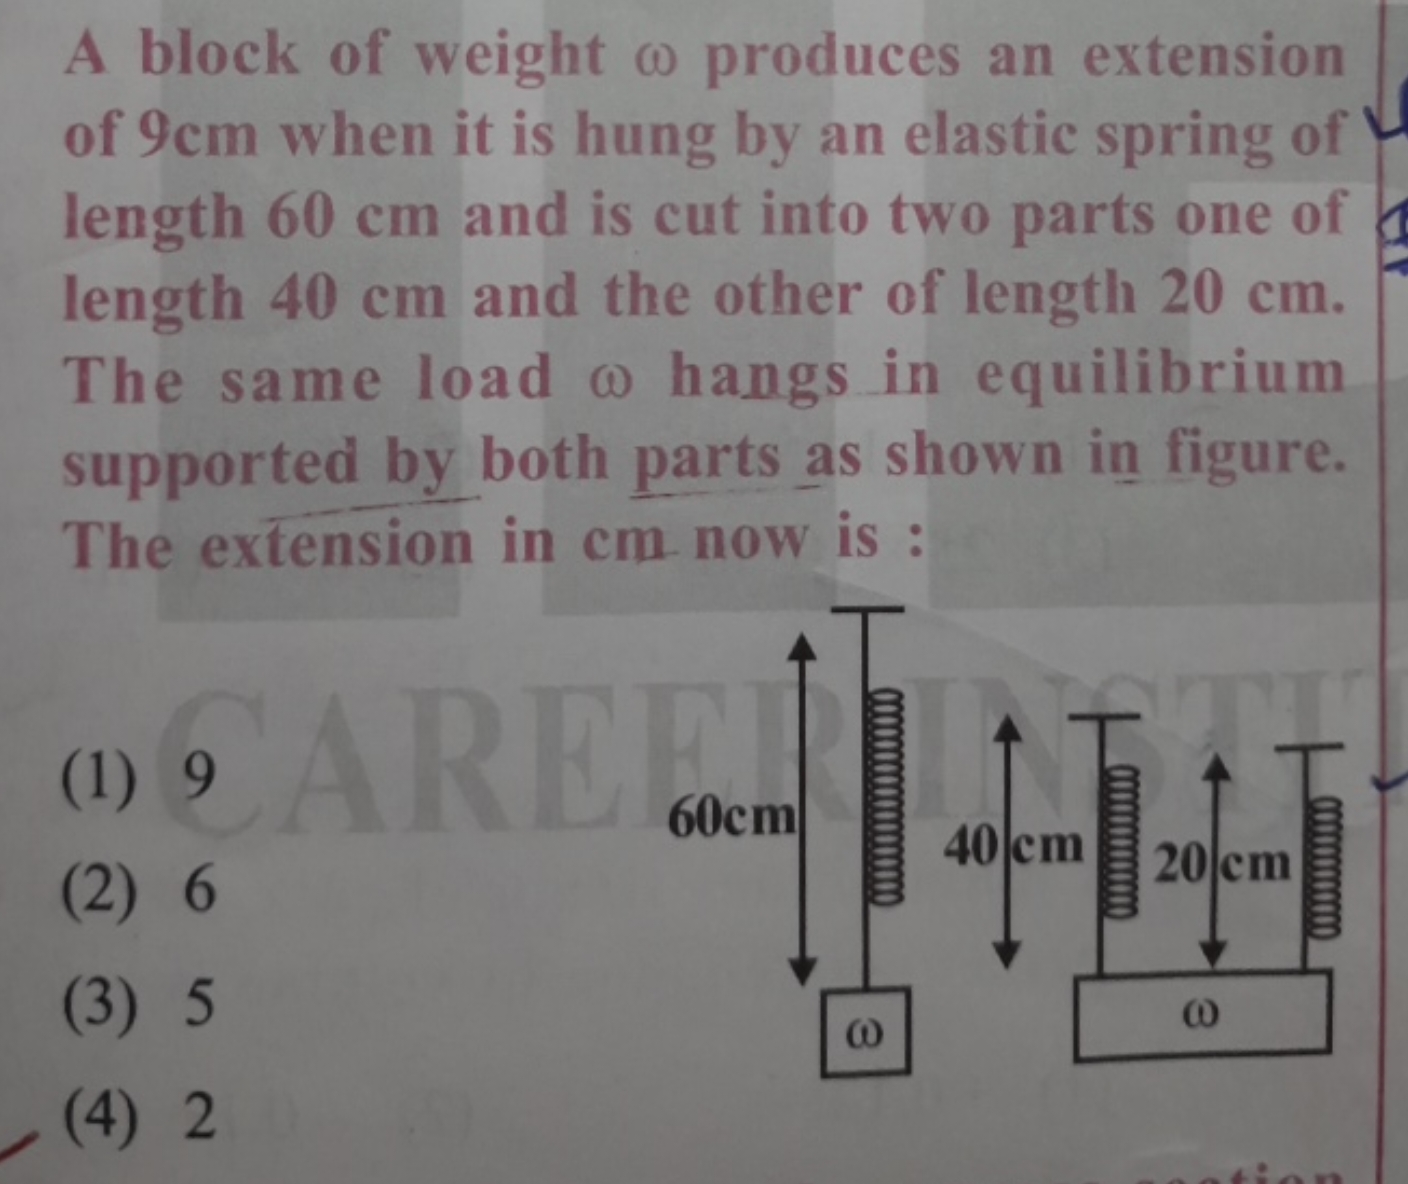 A block of weight ω produces an extension of 9 cm when it is hung by a